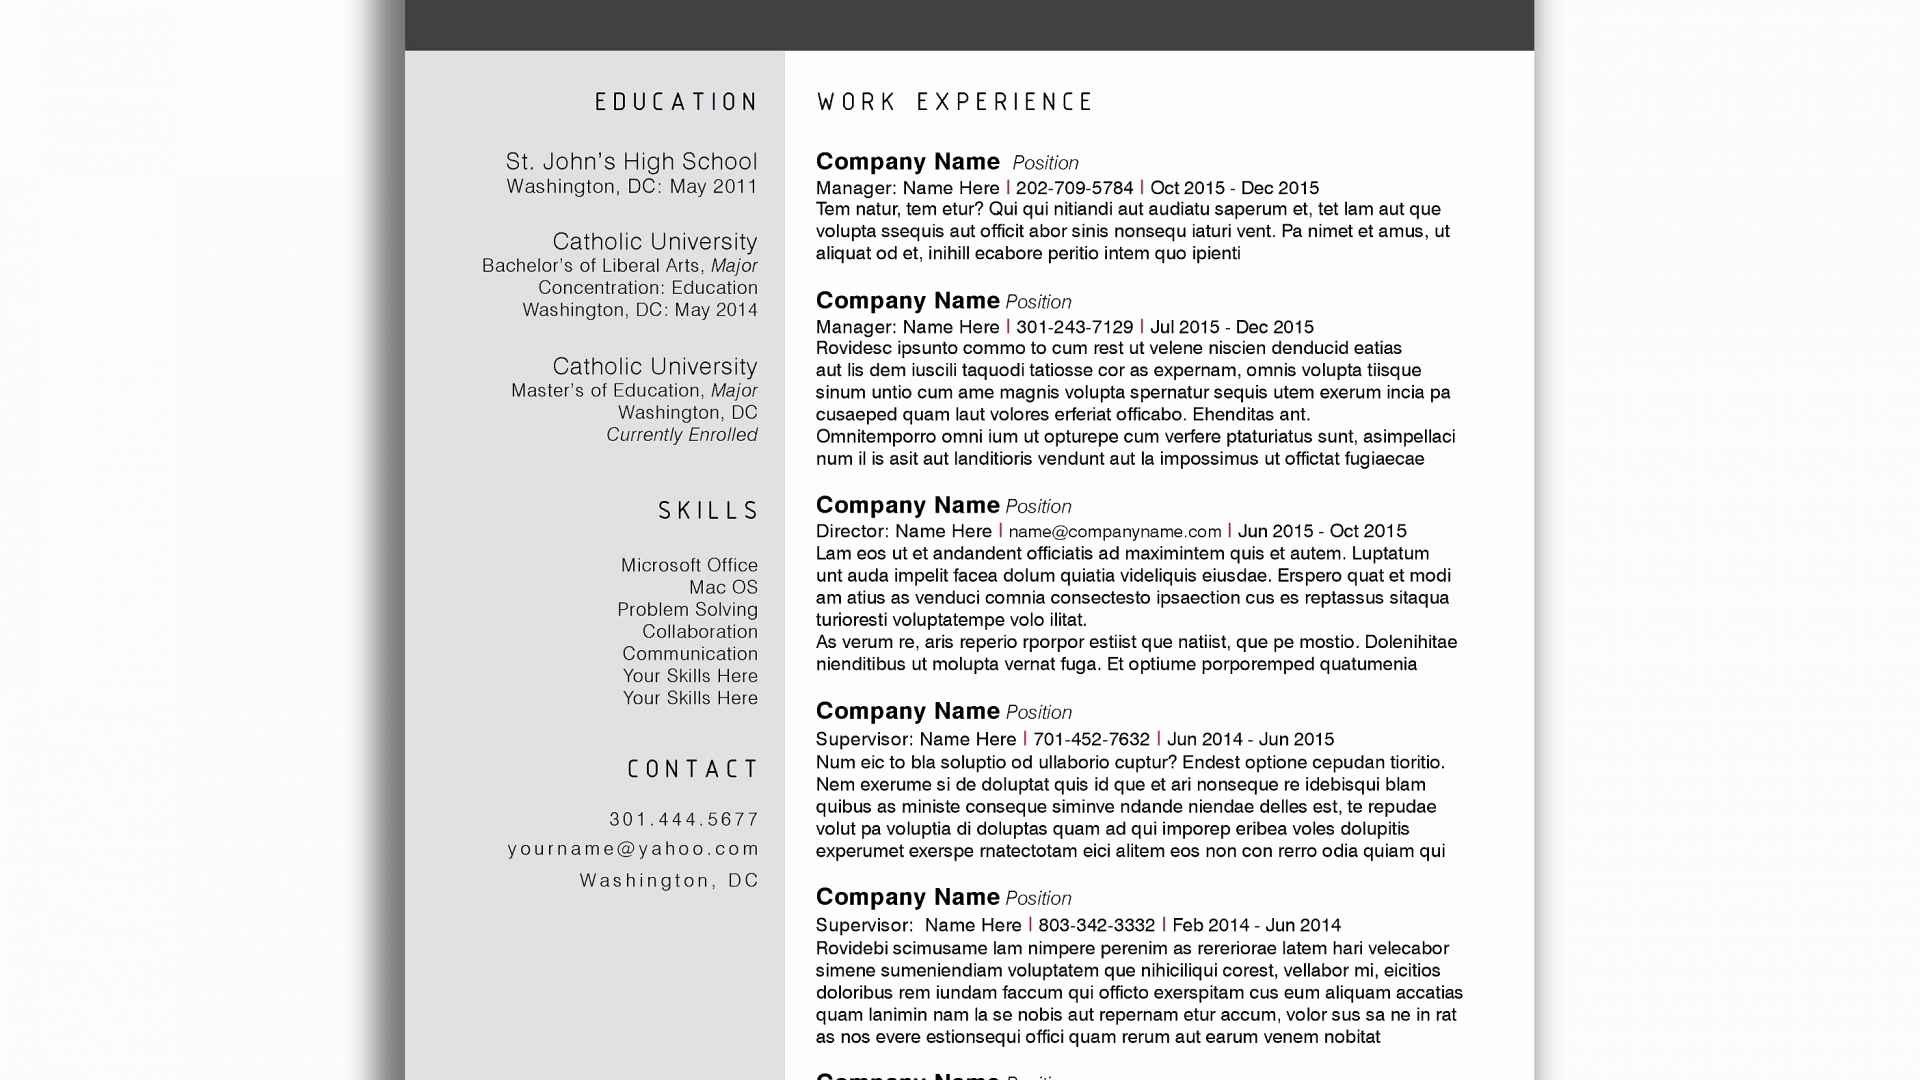 Resume Templates Free Download Modern Resume Template Free Trendy Templatesd New Artistic Of resume templates free download|wikiresume.com